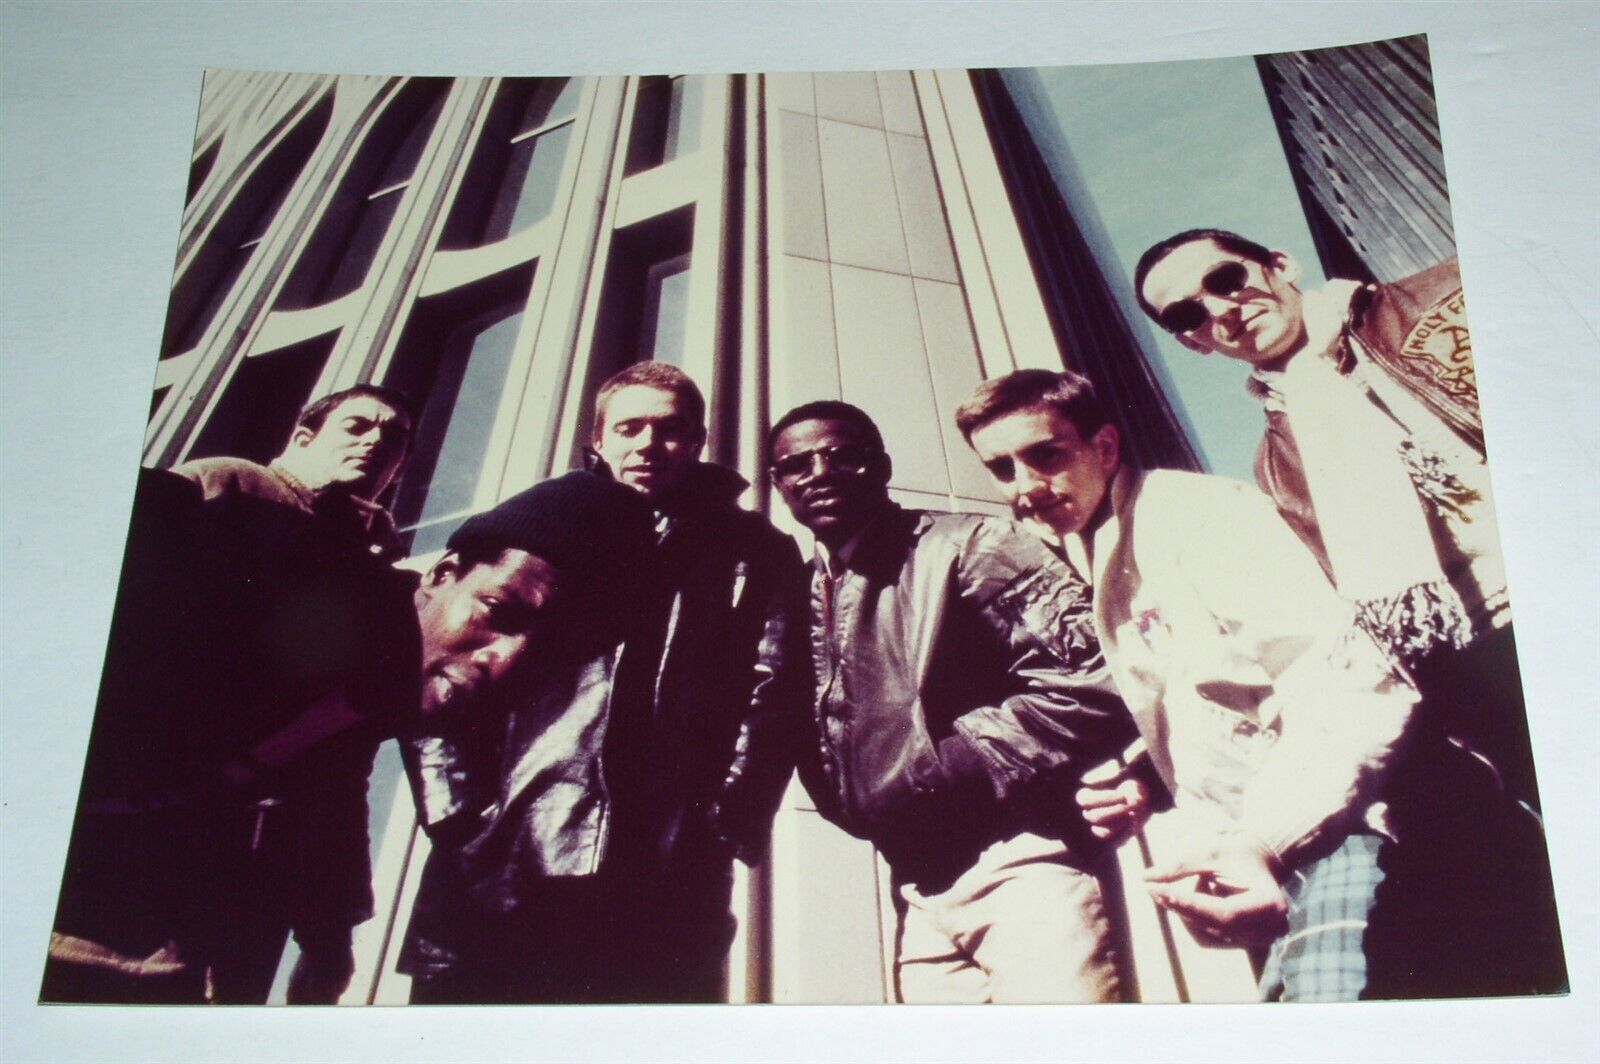 Primary image for The Specials Band Photo Vintage 1980's Color Group Pose 